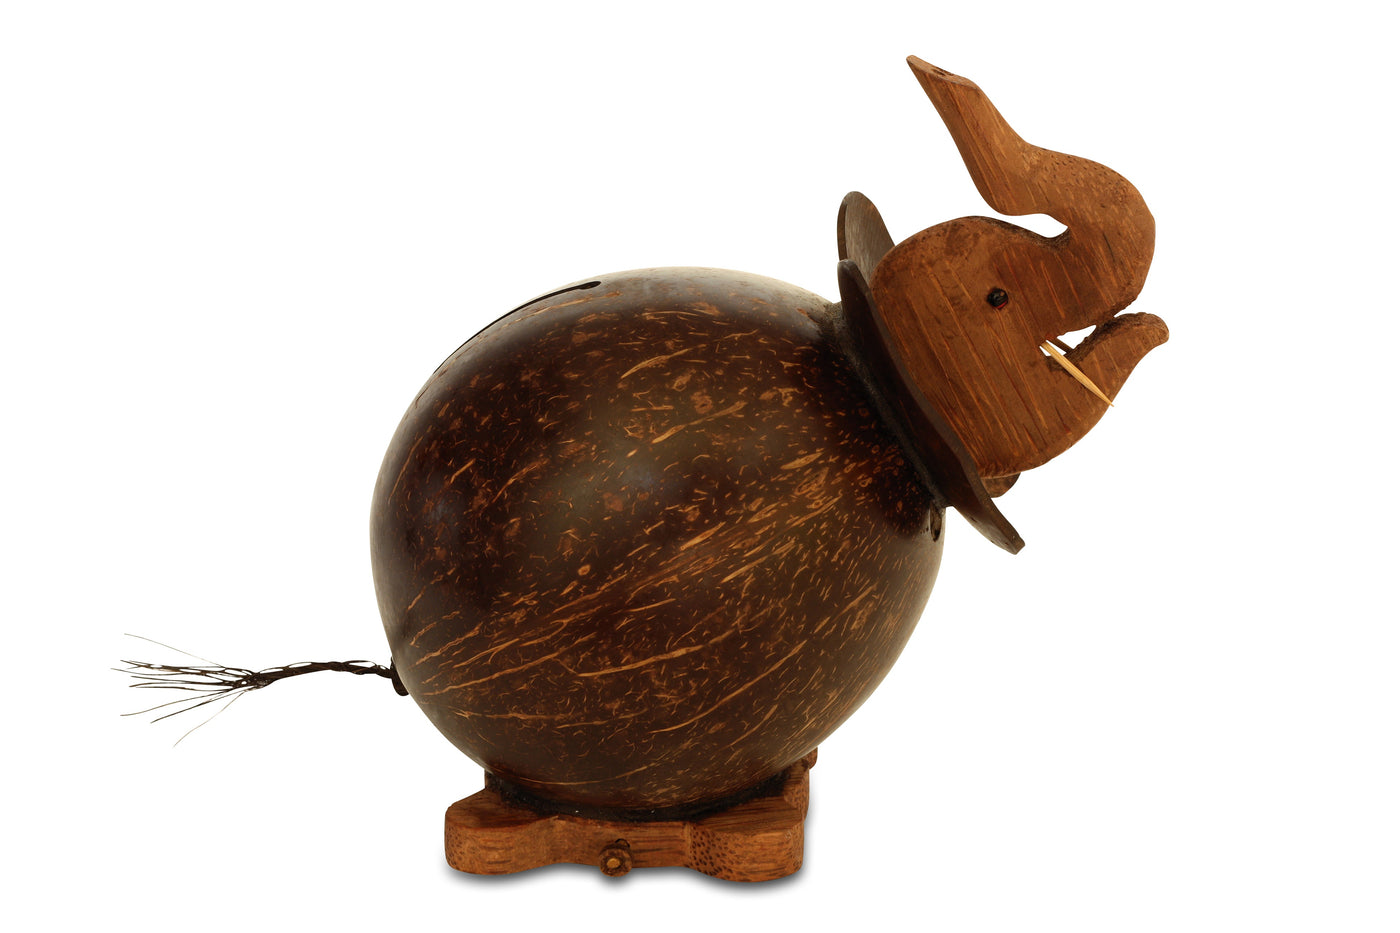 Unique Handmade Coconut Shell Wood Elephant Coin Piggy Bank Handcrafted Wooden Rustic Hand Carved Keepsake Saving Money Adorable Kids Room Decor Gift